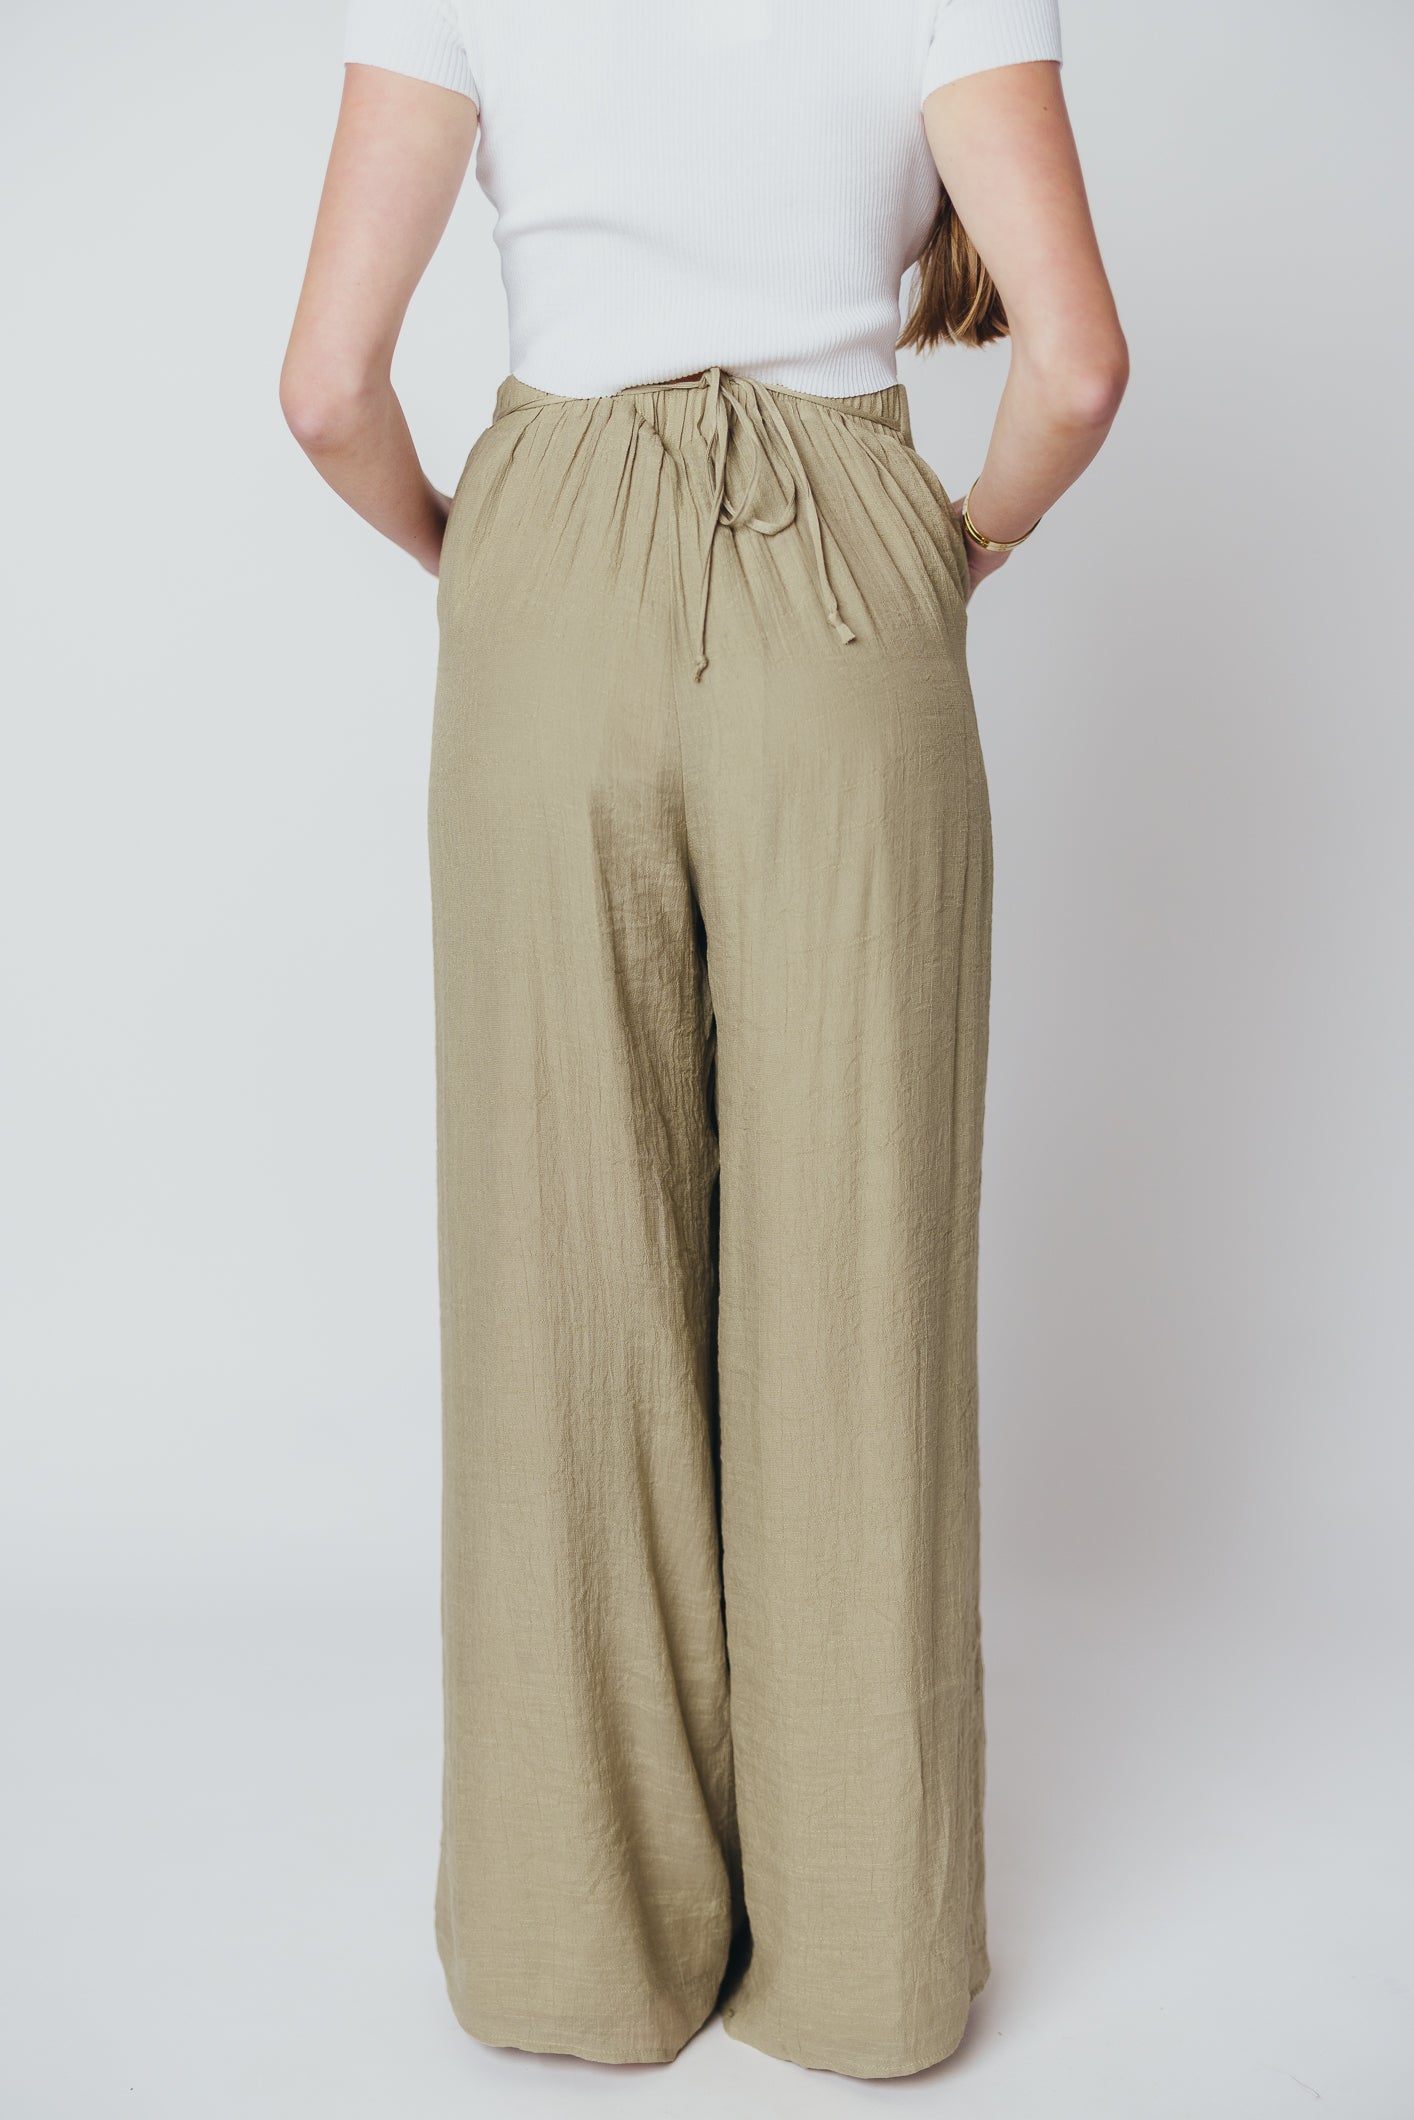 Smooth Sailing Wide Leg Pants in Khaki Olive